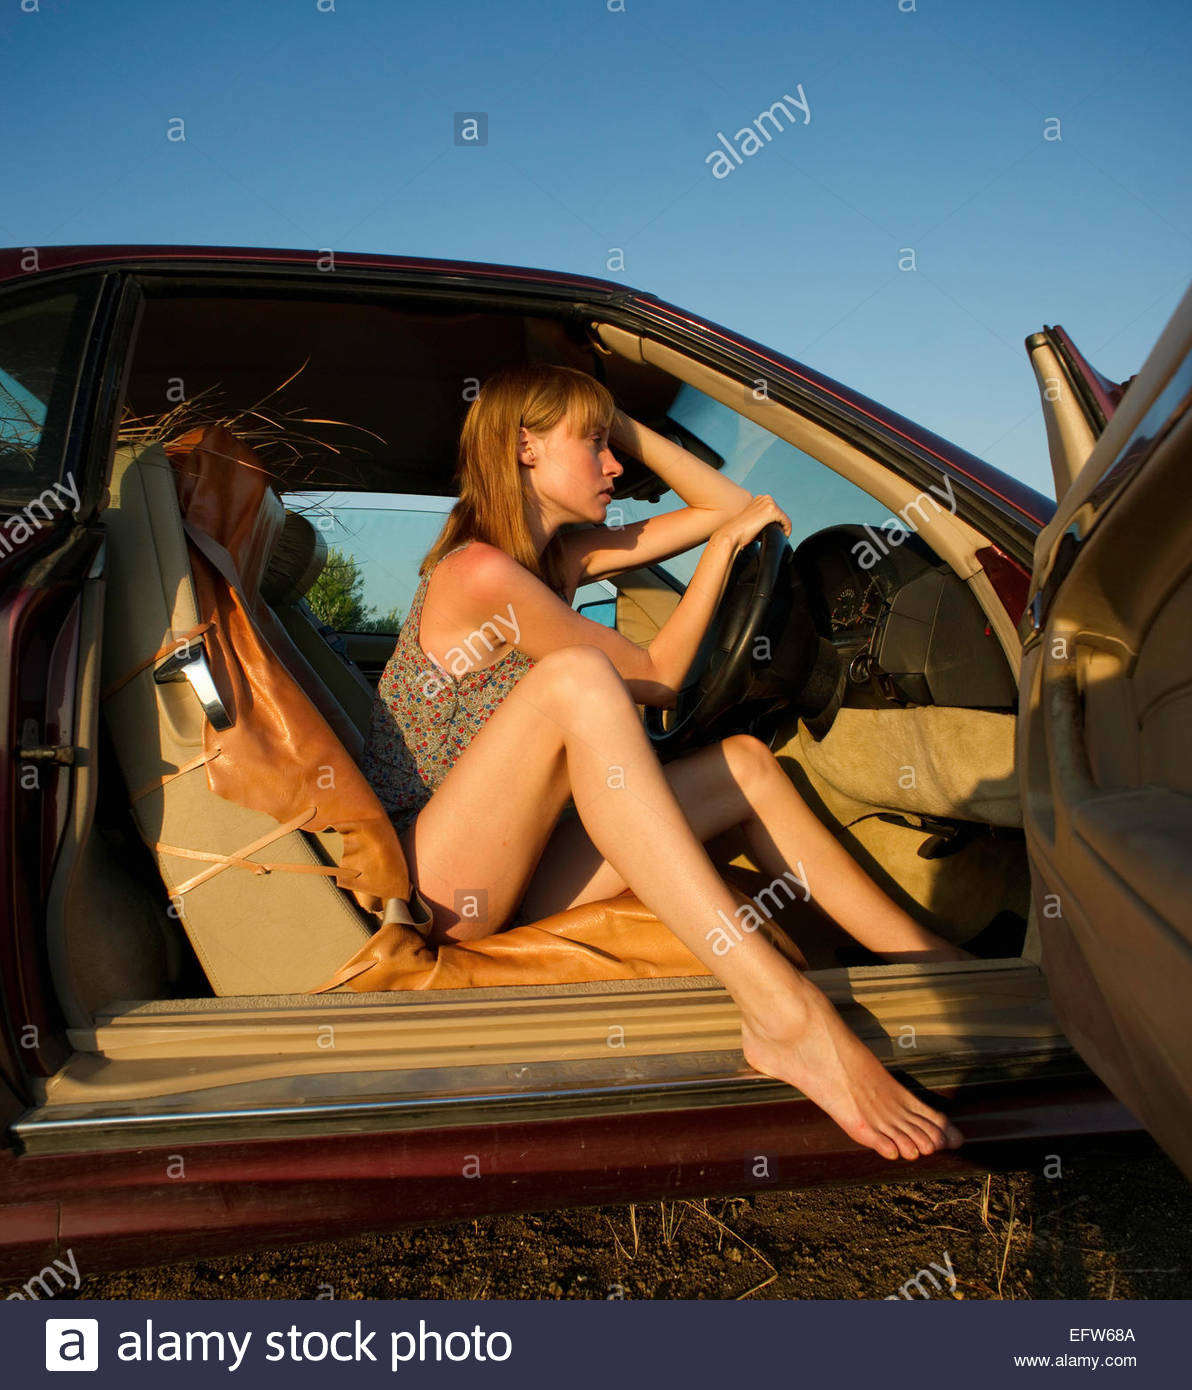 https://c8.alamy.com/comp/EFW68A/woman-driver-sitting-in-a-sports-car-at-the-beach-barefoot-EFW68A.jpg